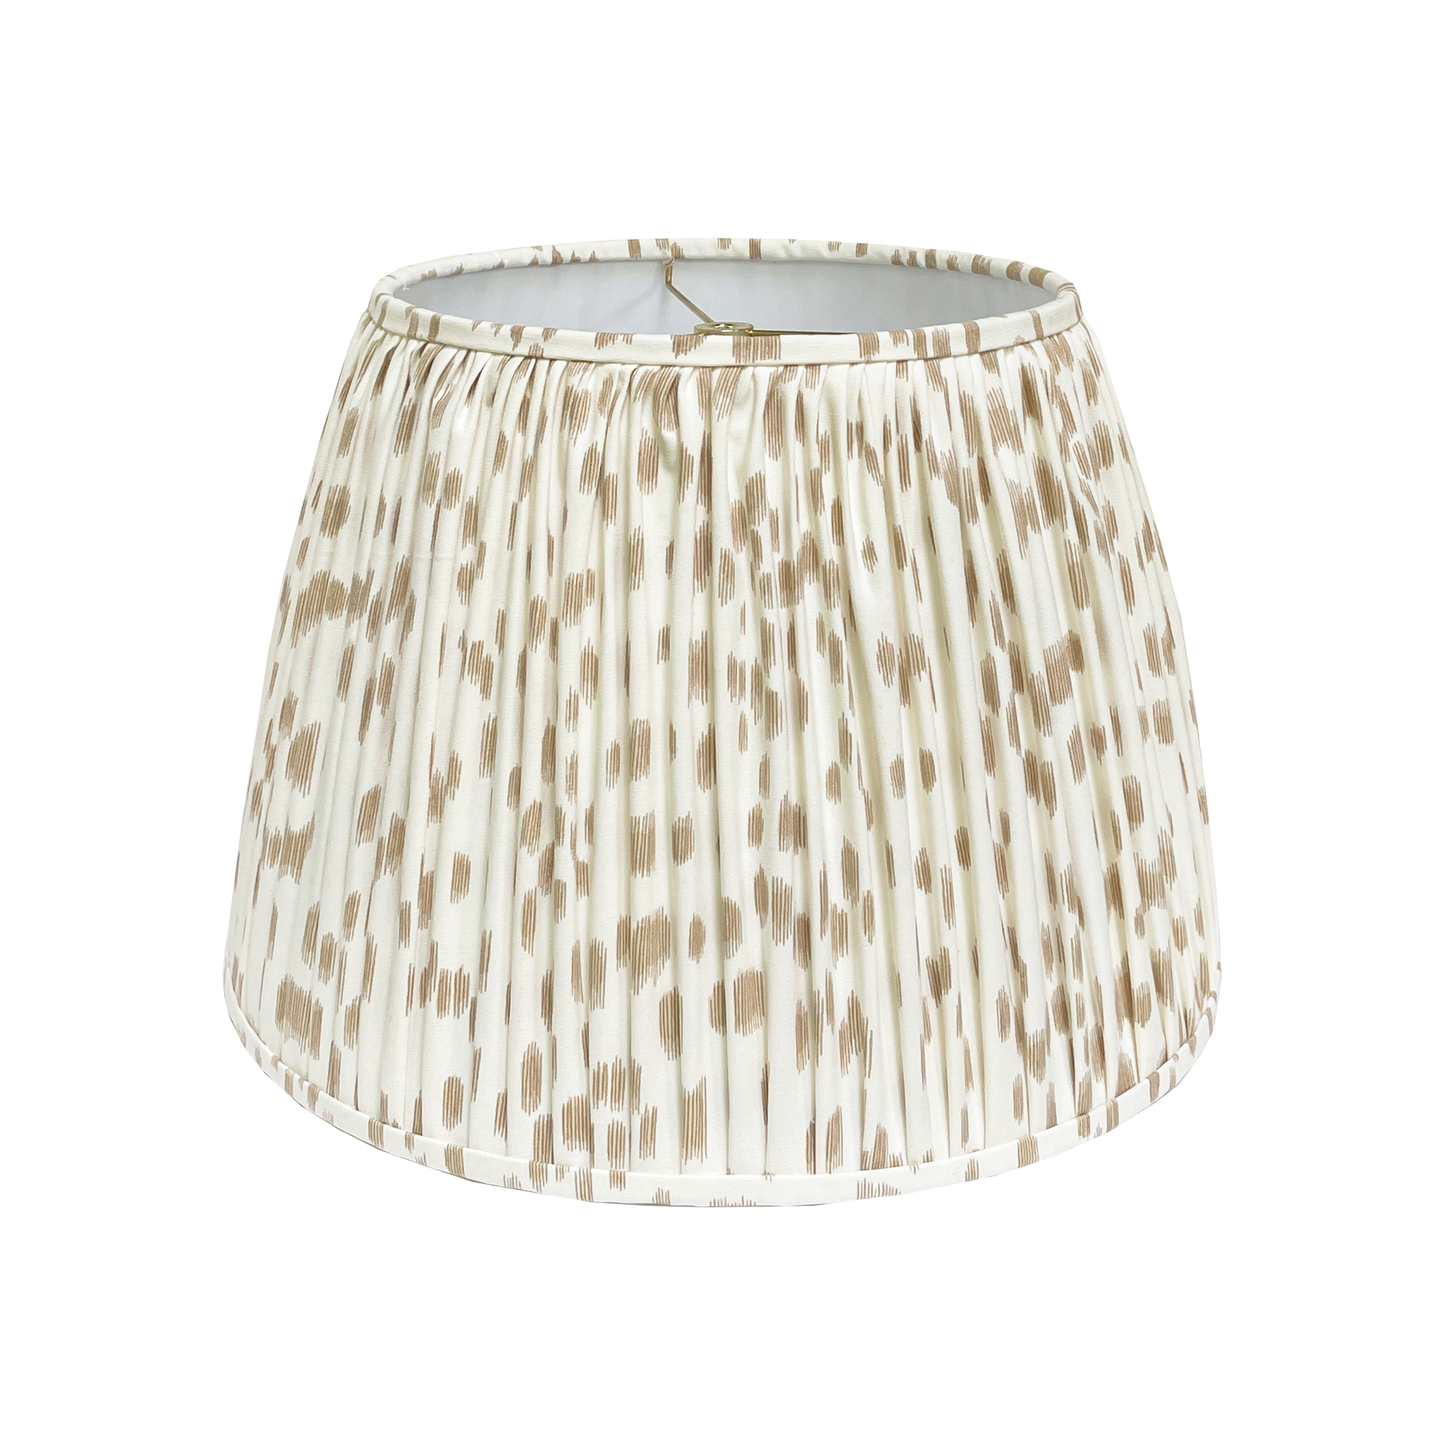 Designer Animal Print Gathered Lamp Shade - Small - Multiple Color Options